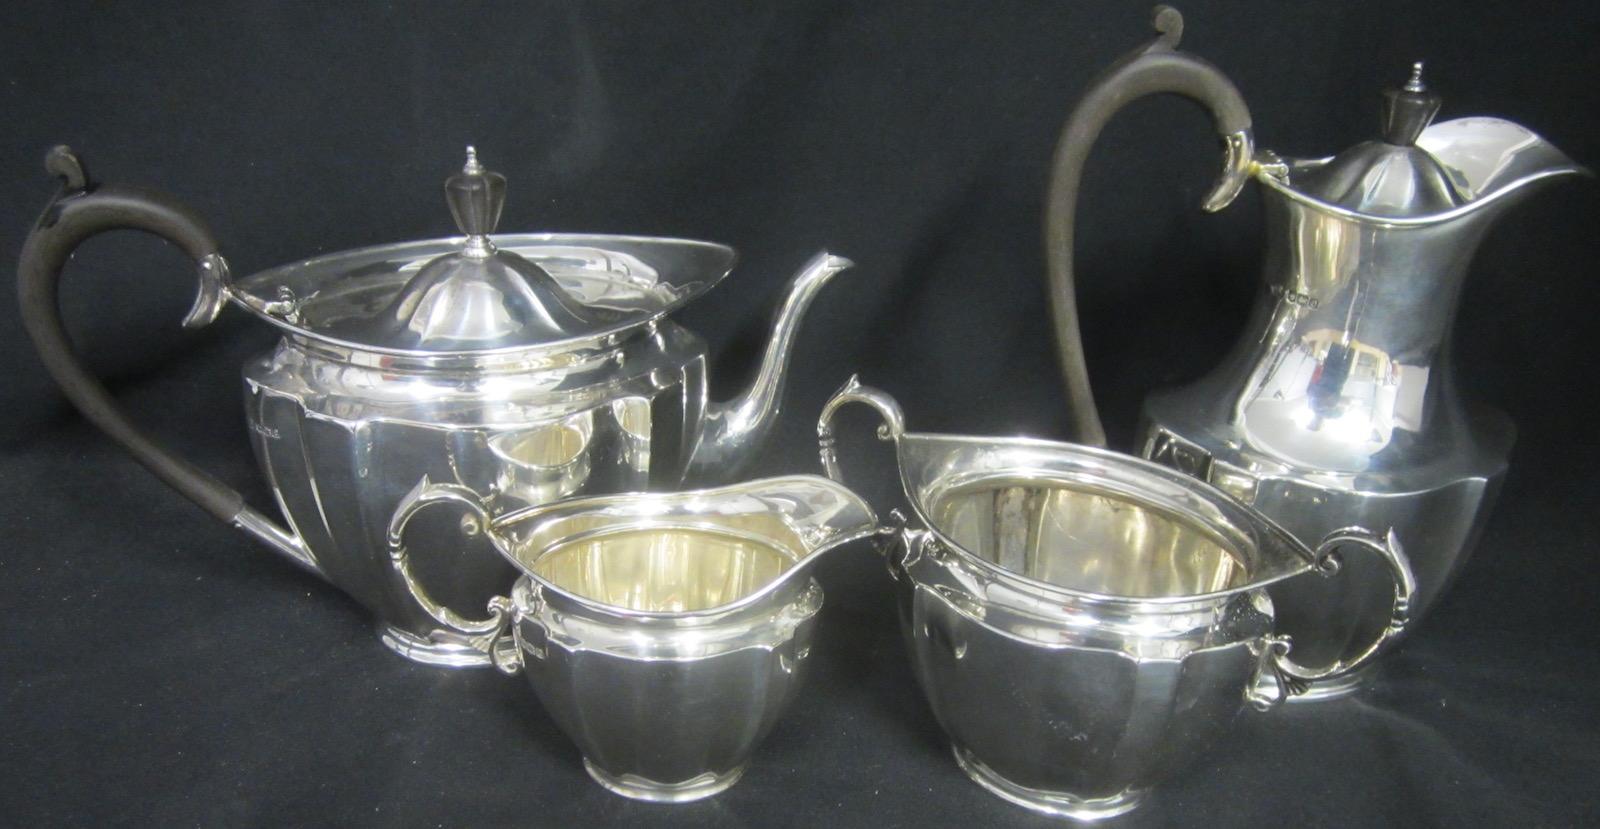 Sterling silver 4-piece tea and coffee set,
Sheffield 1922,
Maker's Mark JR (John Round & Son Ltd - Joseph Ridge),
Total gross weight 56.2 ounces, 1,595 grams
Measures: Largest piece 16 x 10 x 22cm high.
Our eclectic stock crosses cultures,